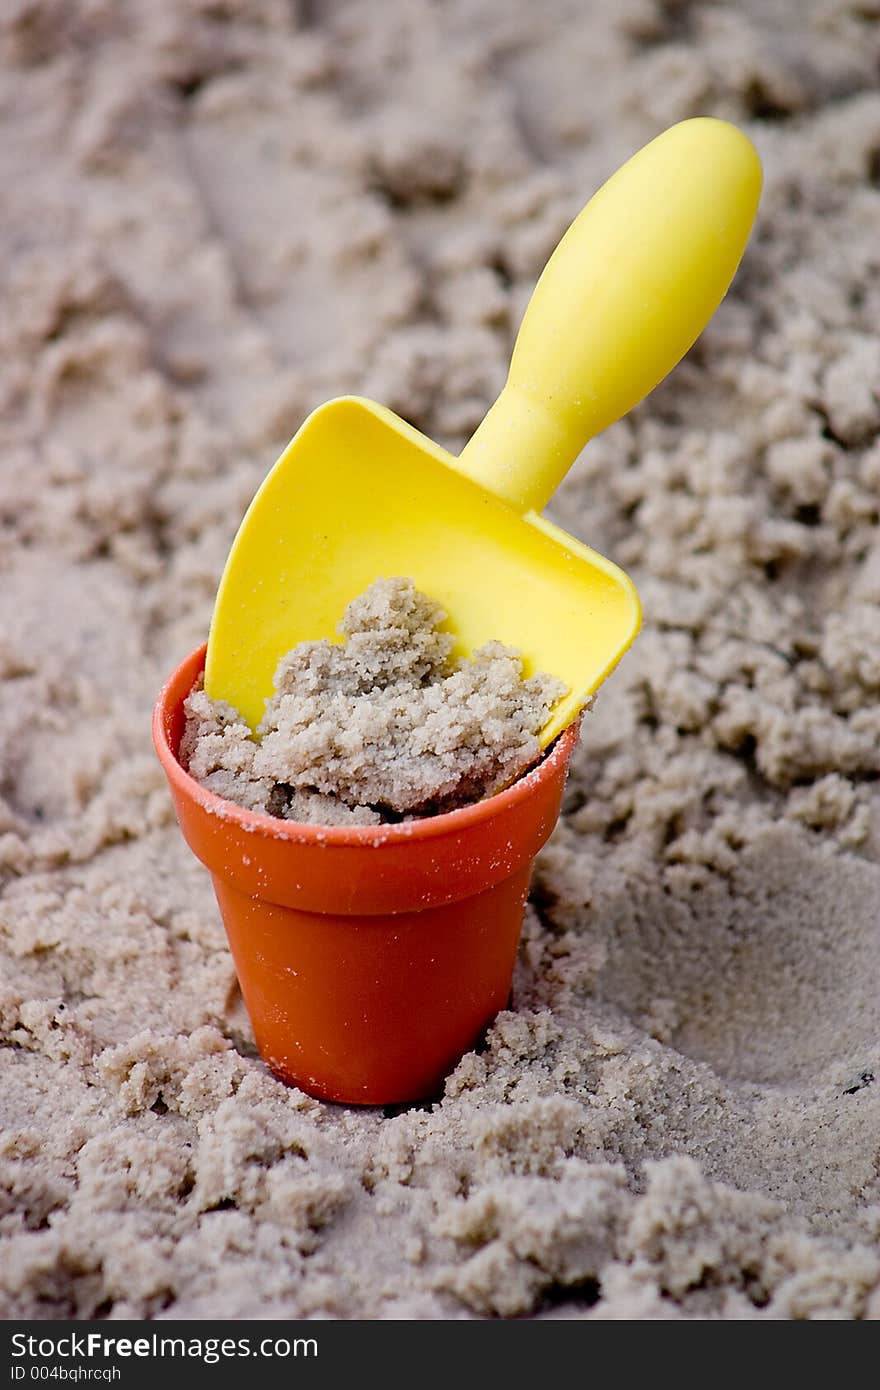 Yellow Small Shovel with Bucket in Sand. Yellow Small Shovel with Bucket in Sand